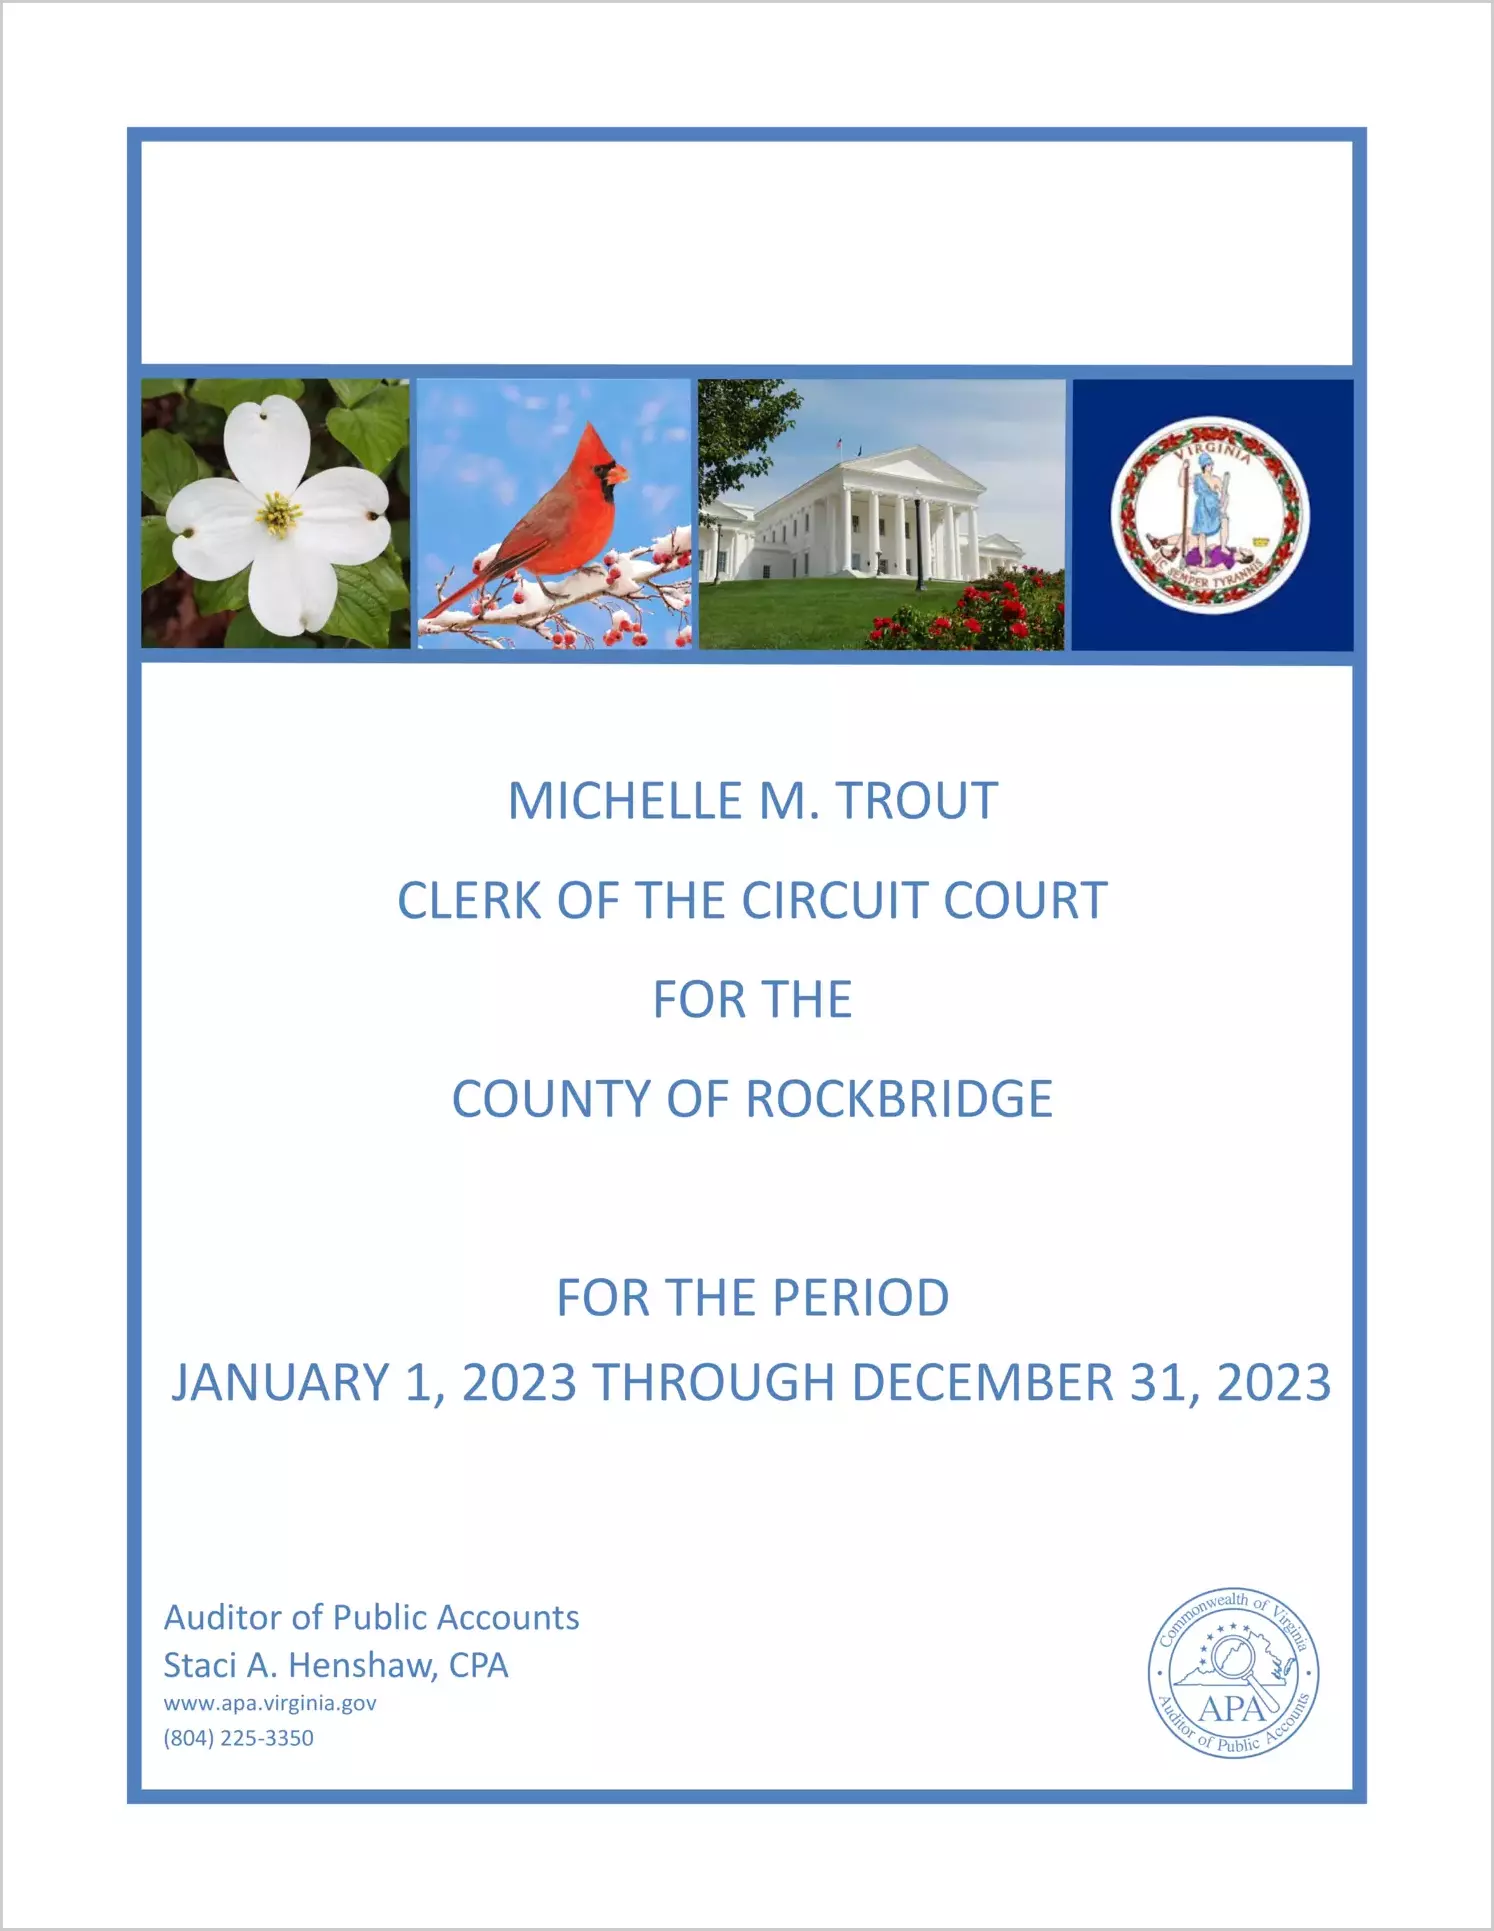 Clerk of the Circuit Court for the County of Rockbridge for the period January 1, 2023 through December 31, 2023